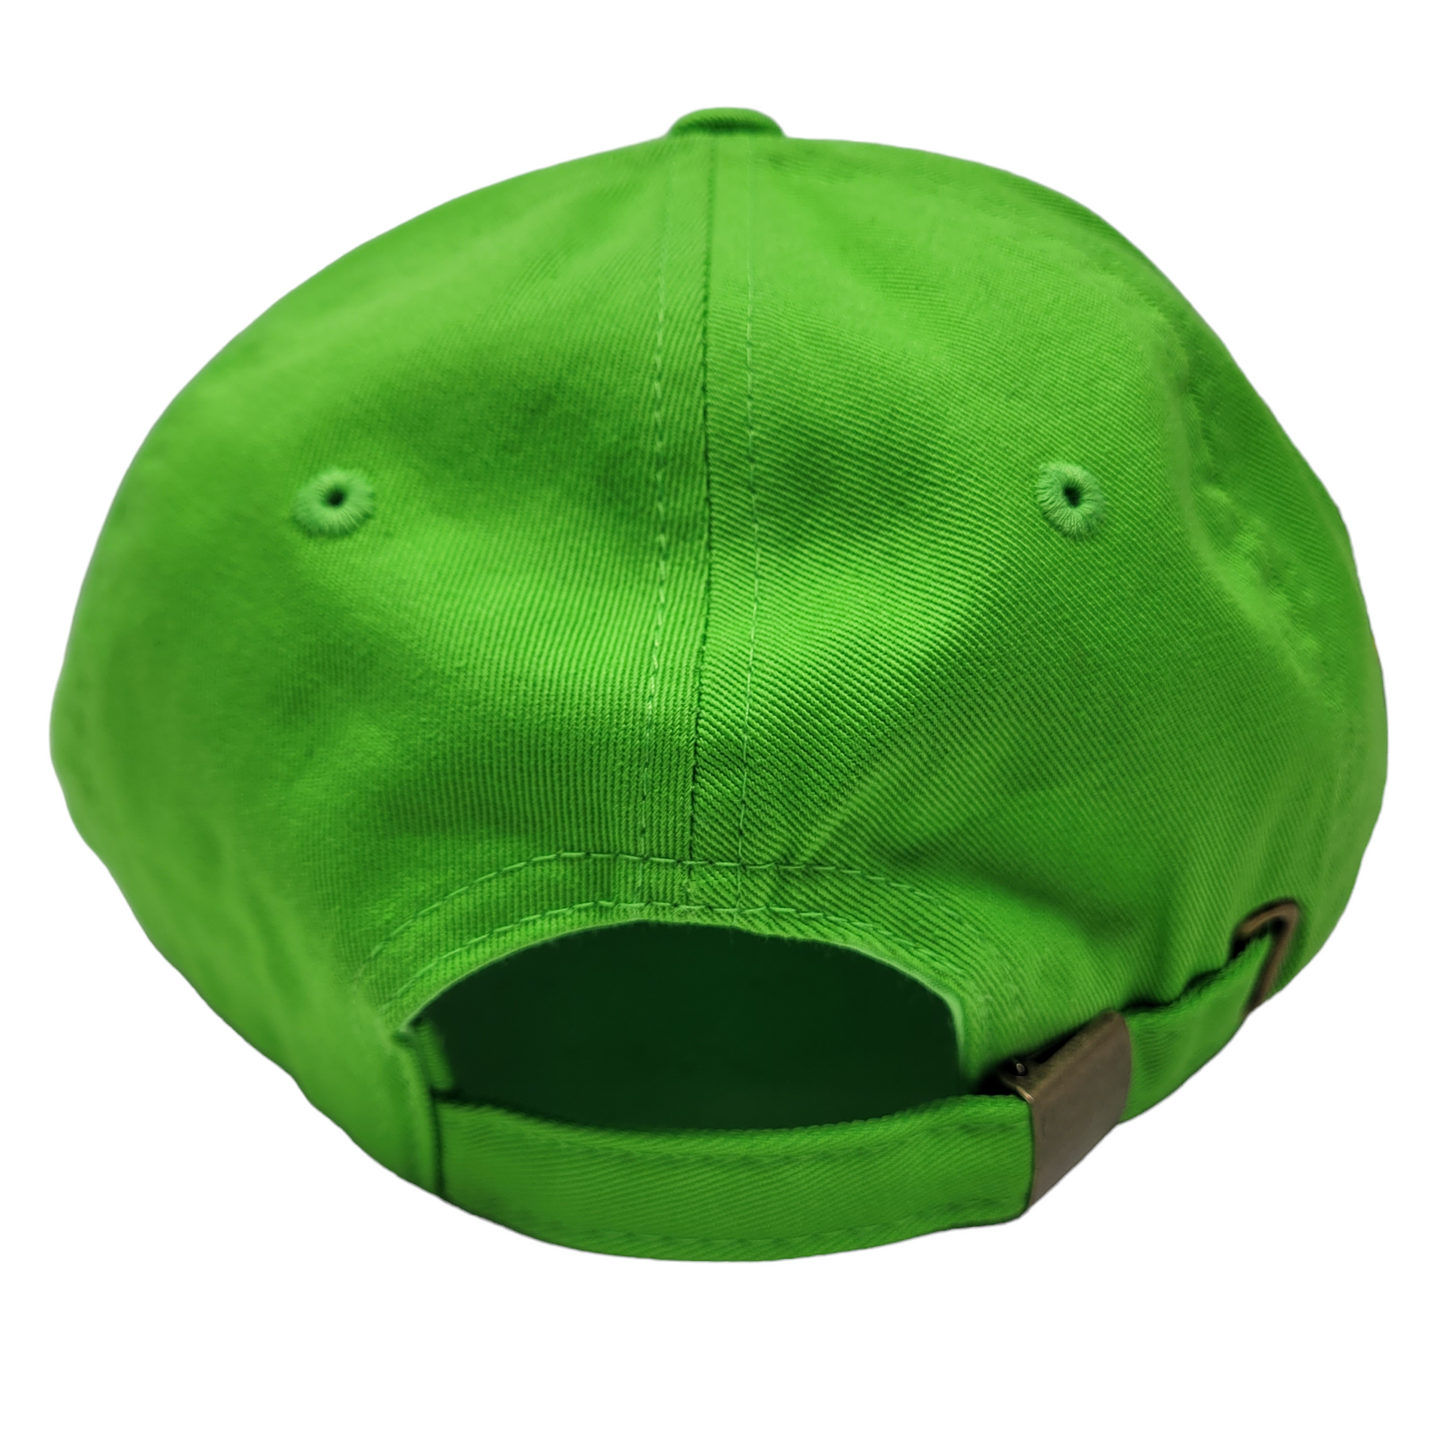 THE TAG LOGO DAD HAT IN BRIGHT GREEN